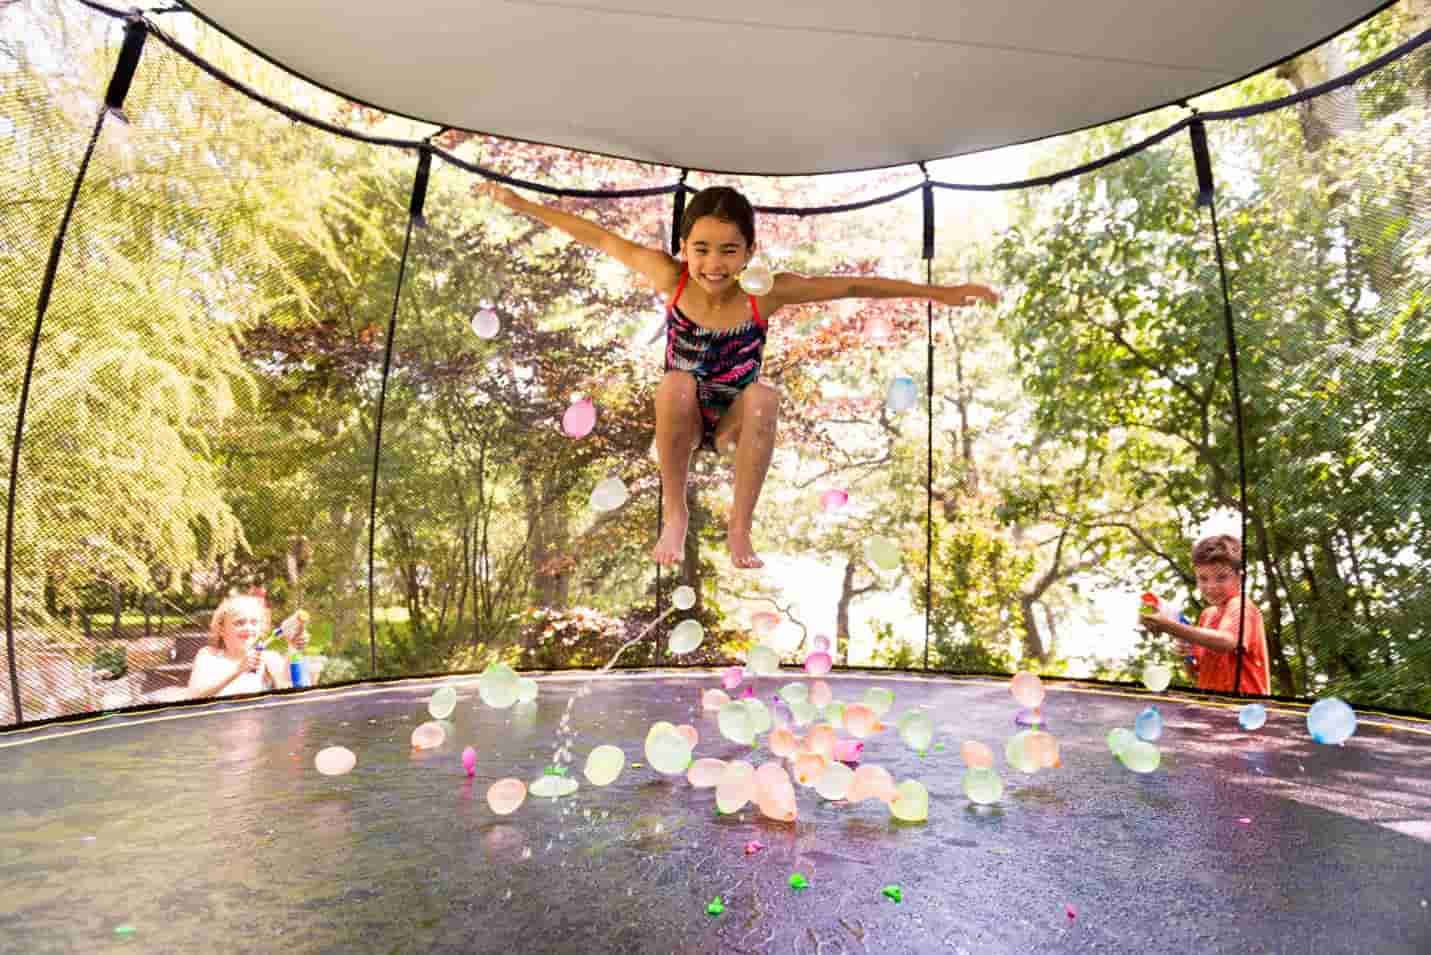 A girl jumping with water balloons on a Springfree Trampoline with a Sunshade attached to the top.